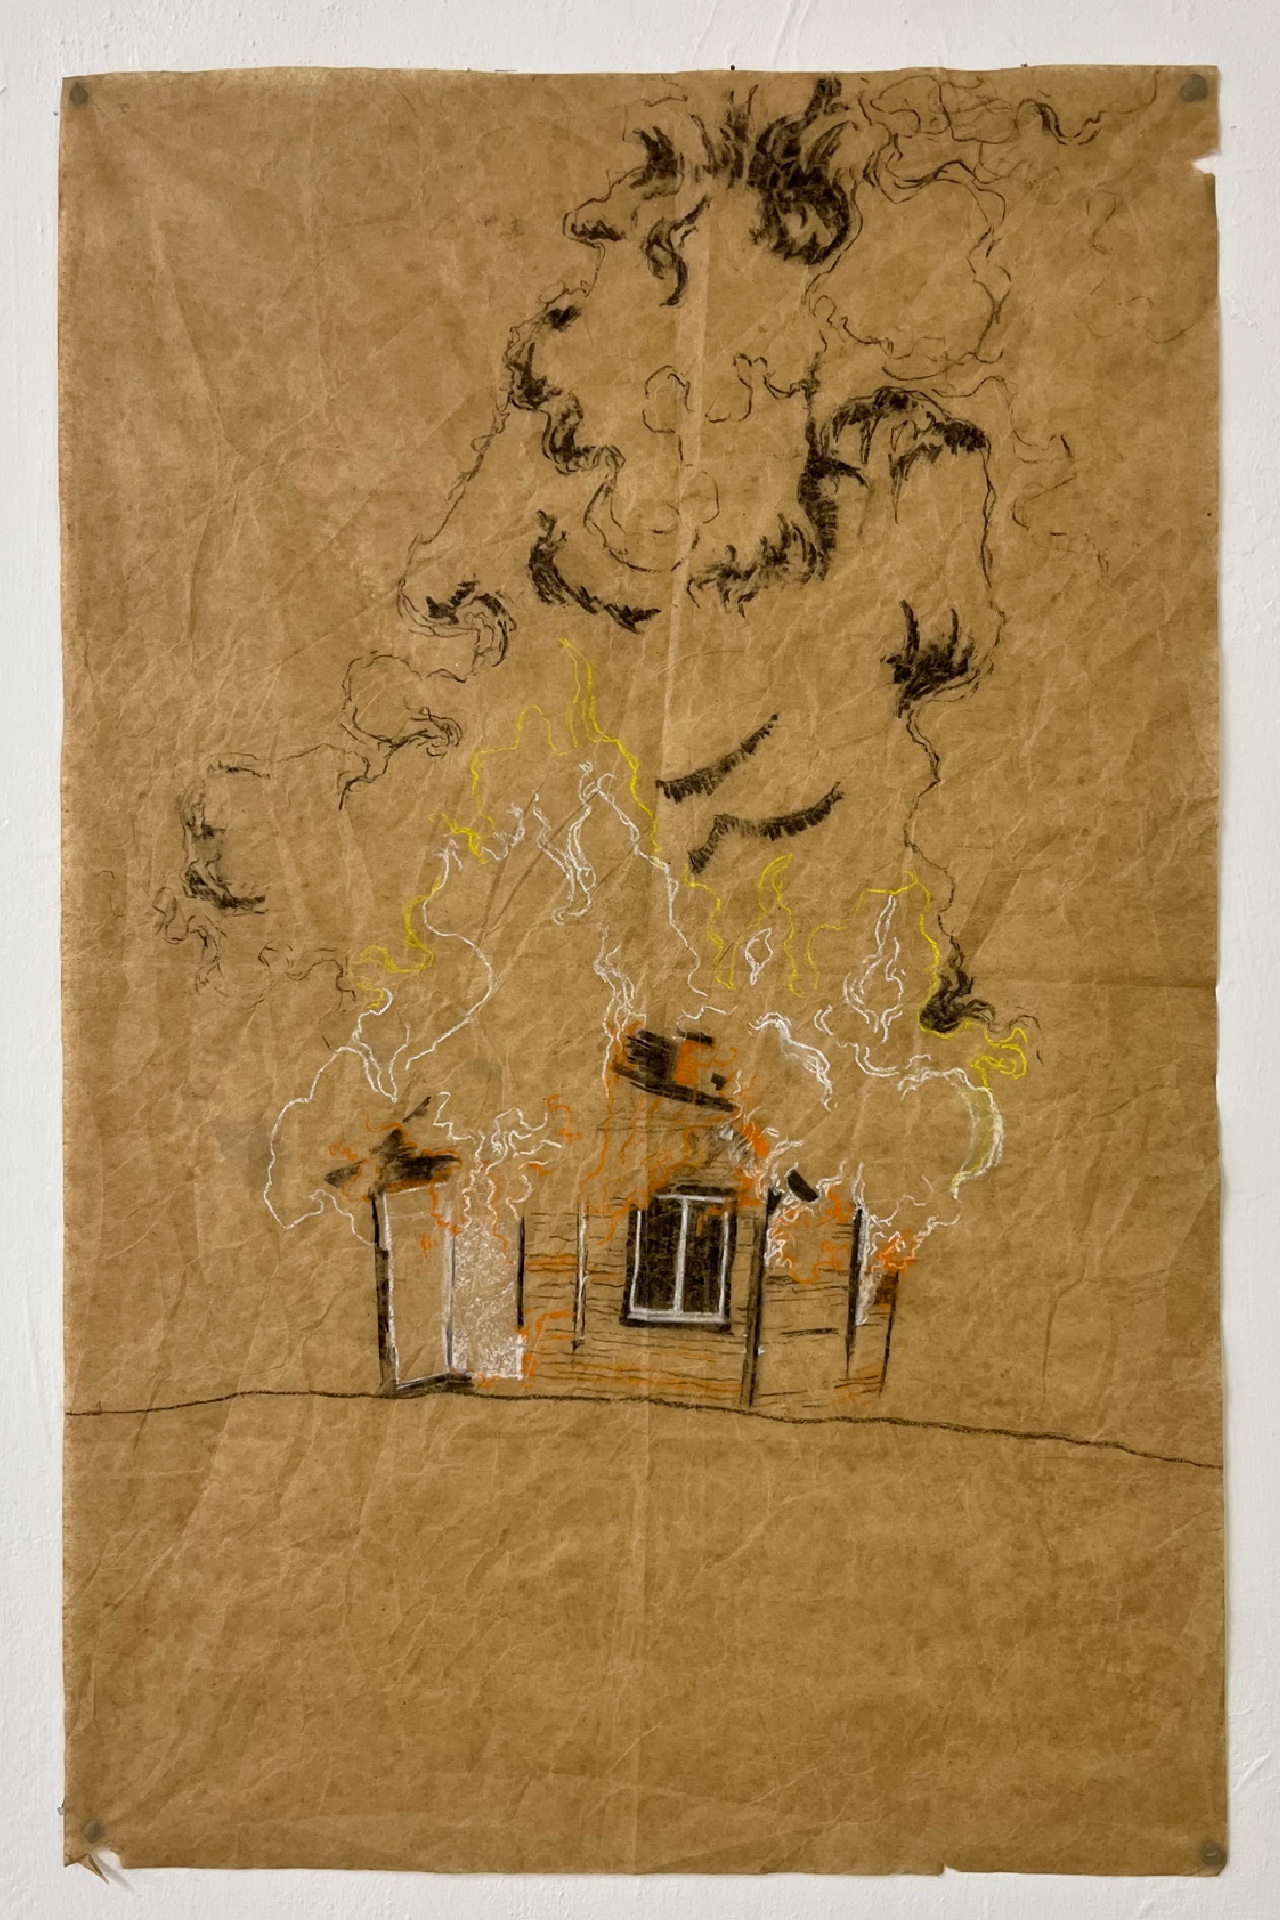 An illustration of a small wooden cabin on fire with billowing clouds of smoke, hung on a blank white wall. Drawn with charcoal, white, orange, and yellow chalk pastel on crumpled brown packing paper.